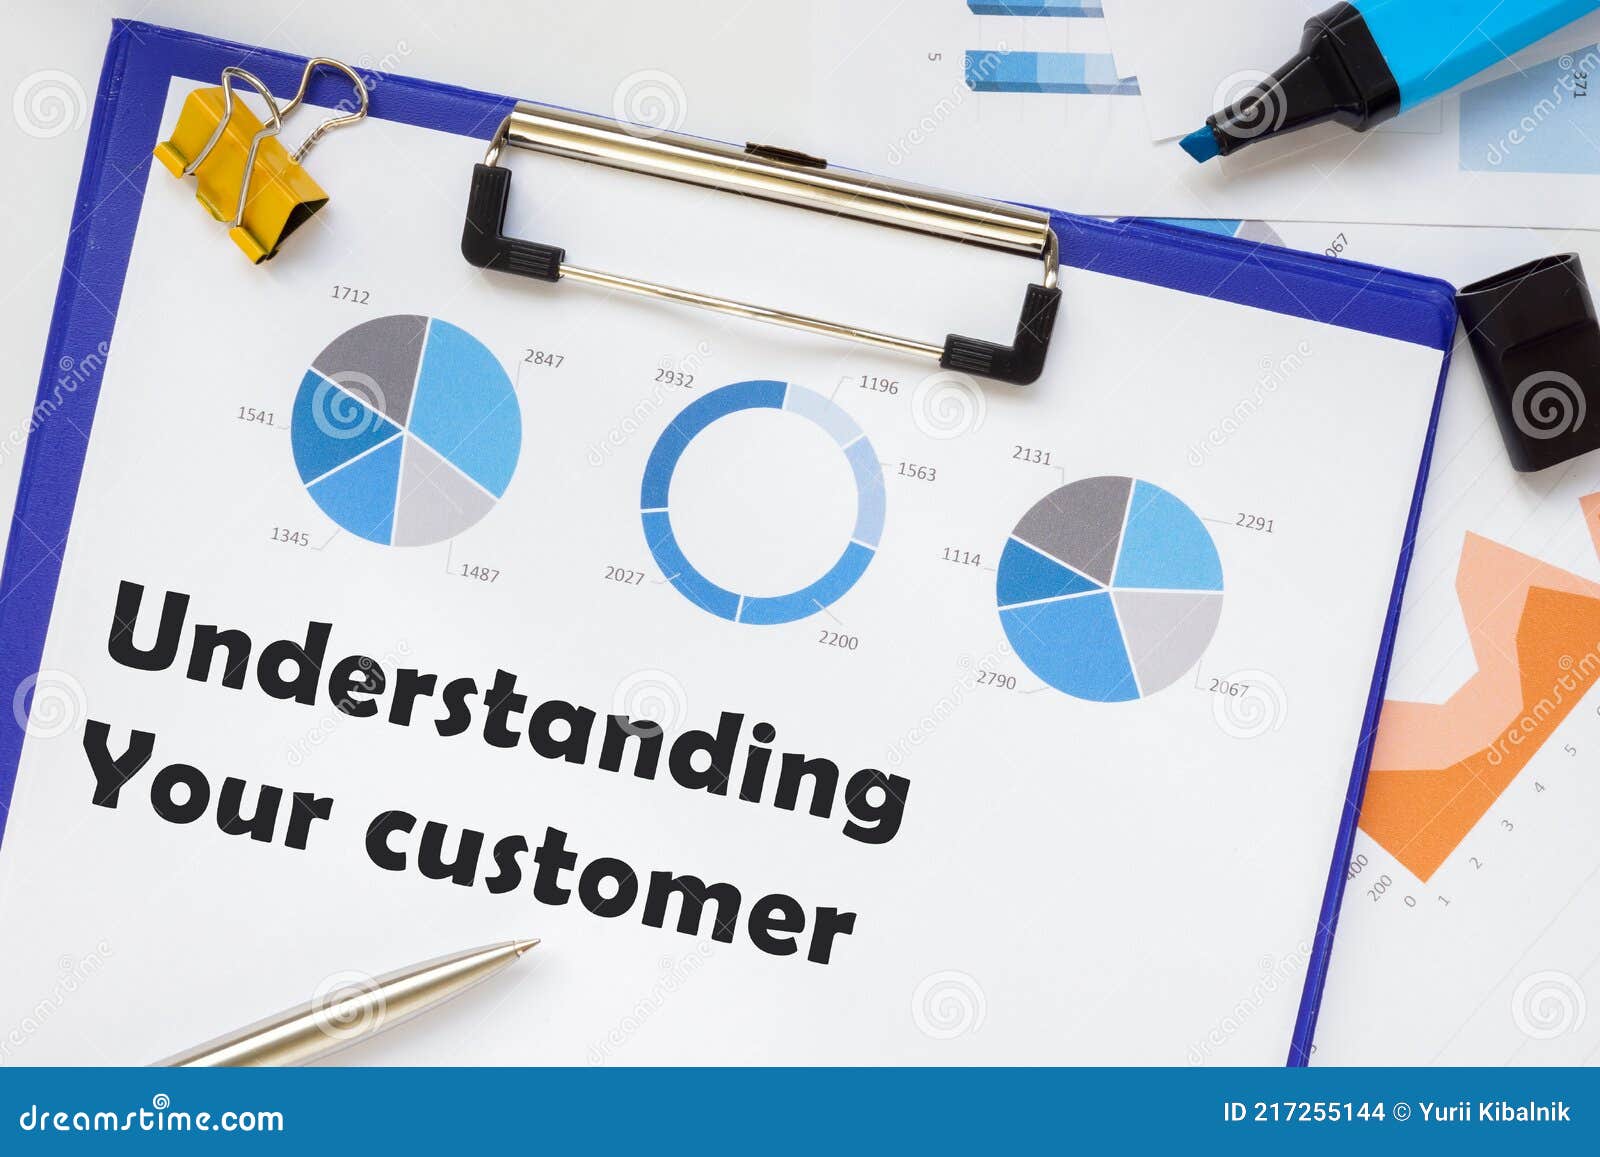 understanding your customer inscription on the page